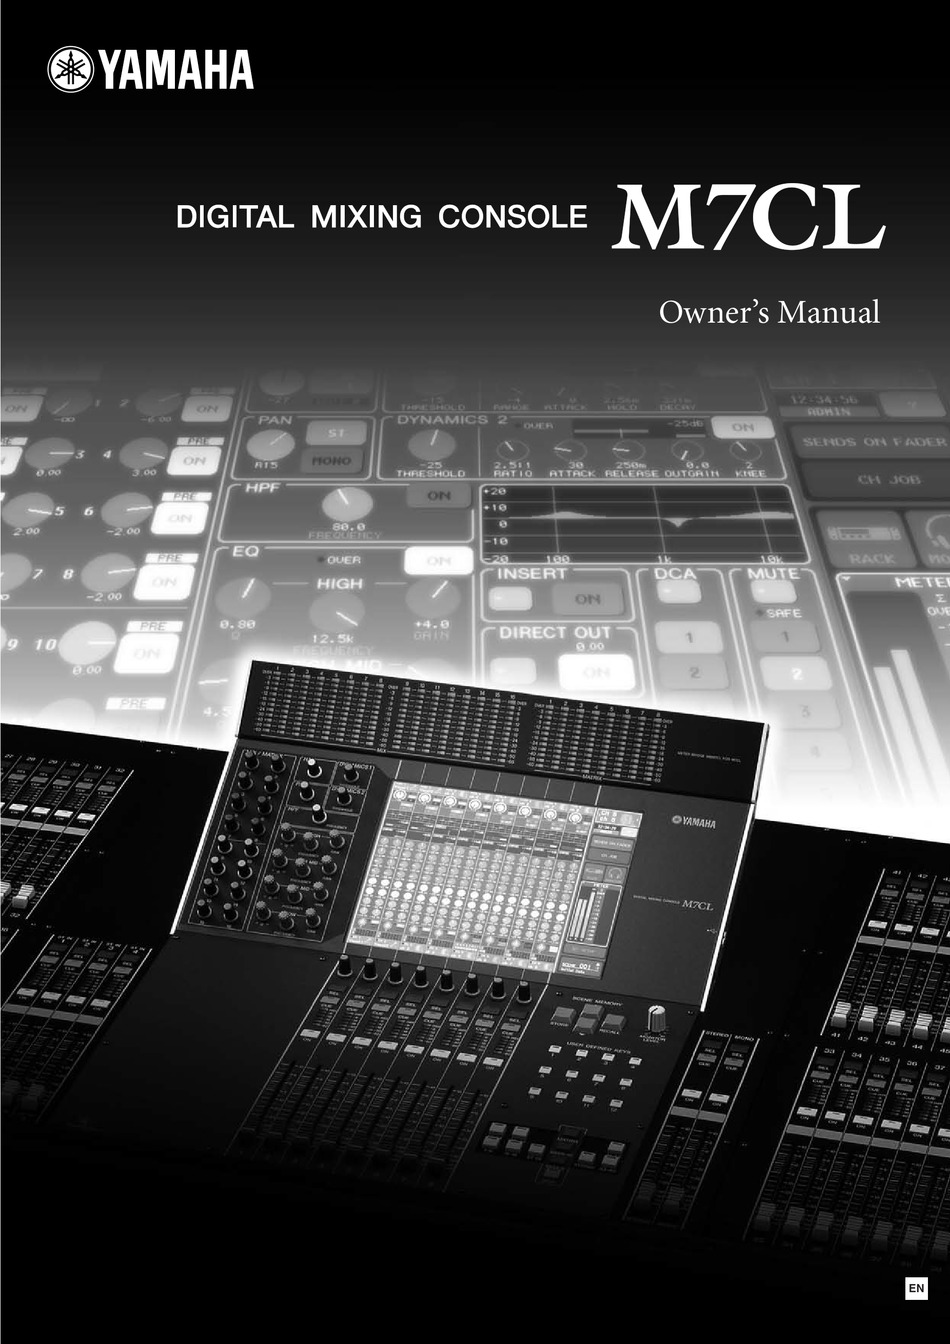 yamaha studio manager problems loading m7cl editor troubleshooting